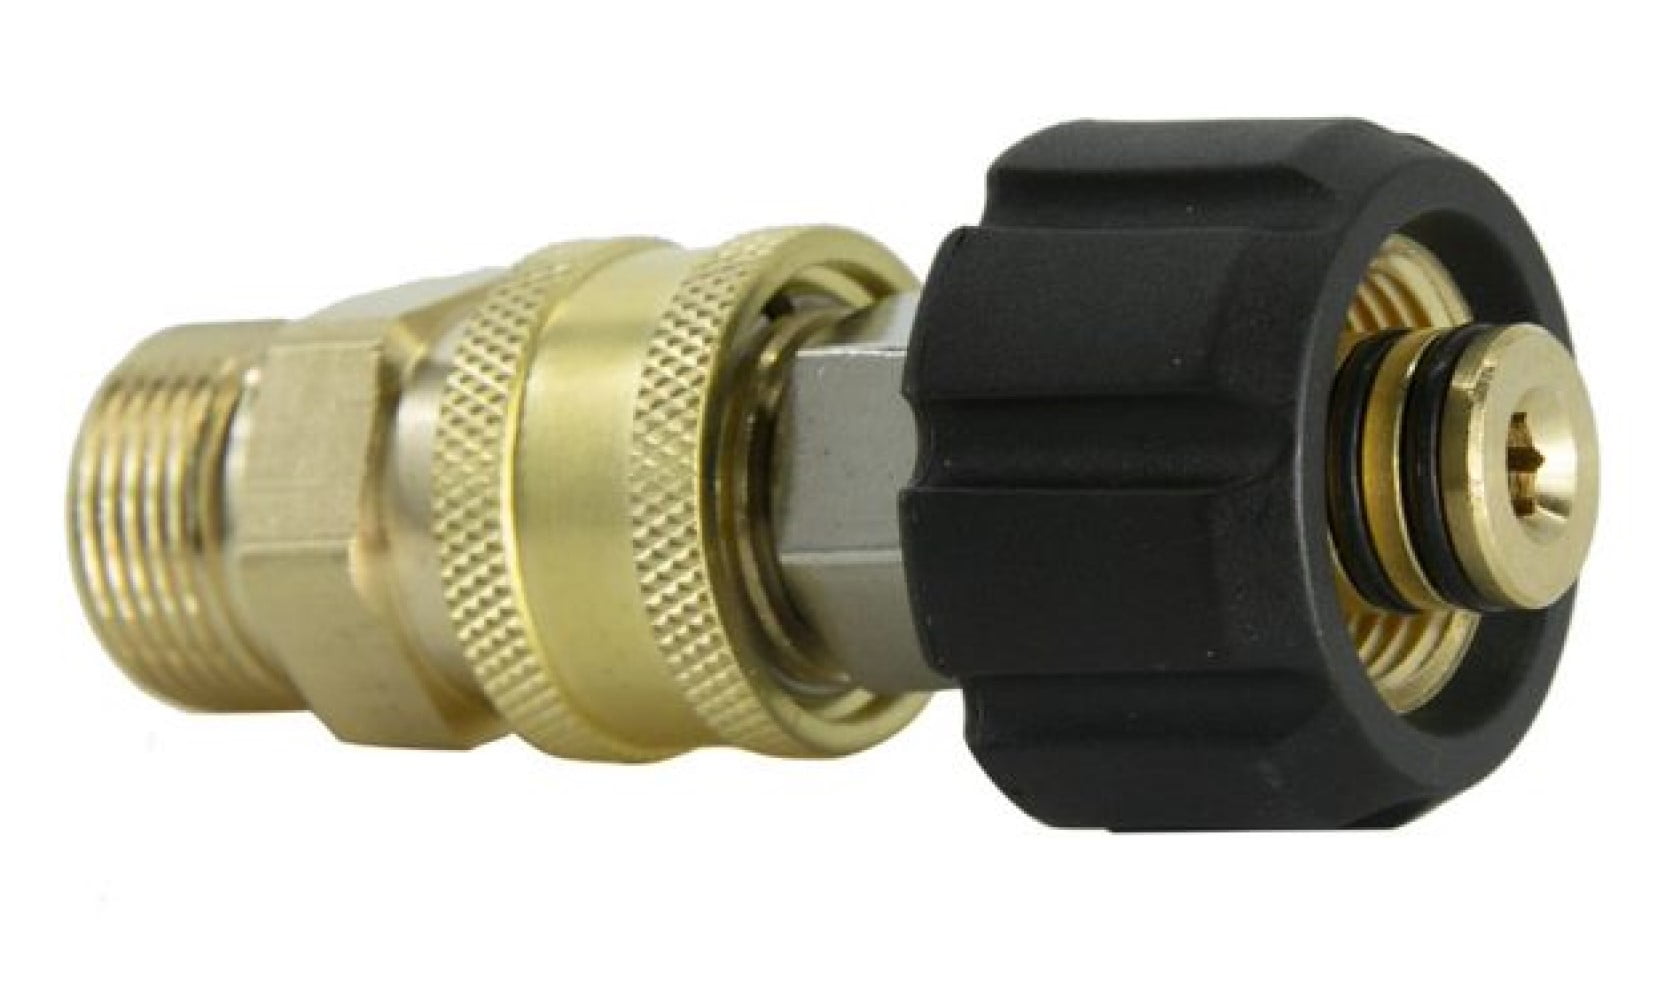 3/8" Quick Connect Fittings for Pressure Washer Hose-New Top Quality 